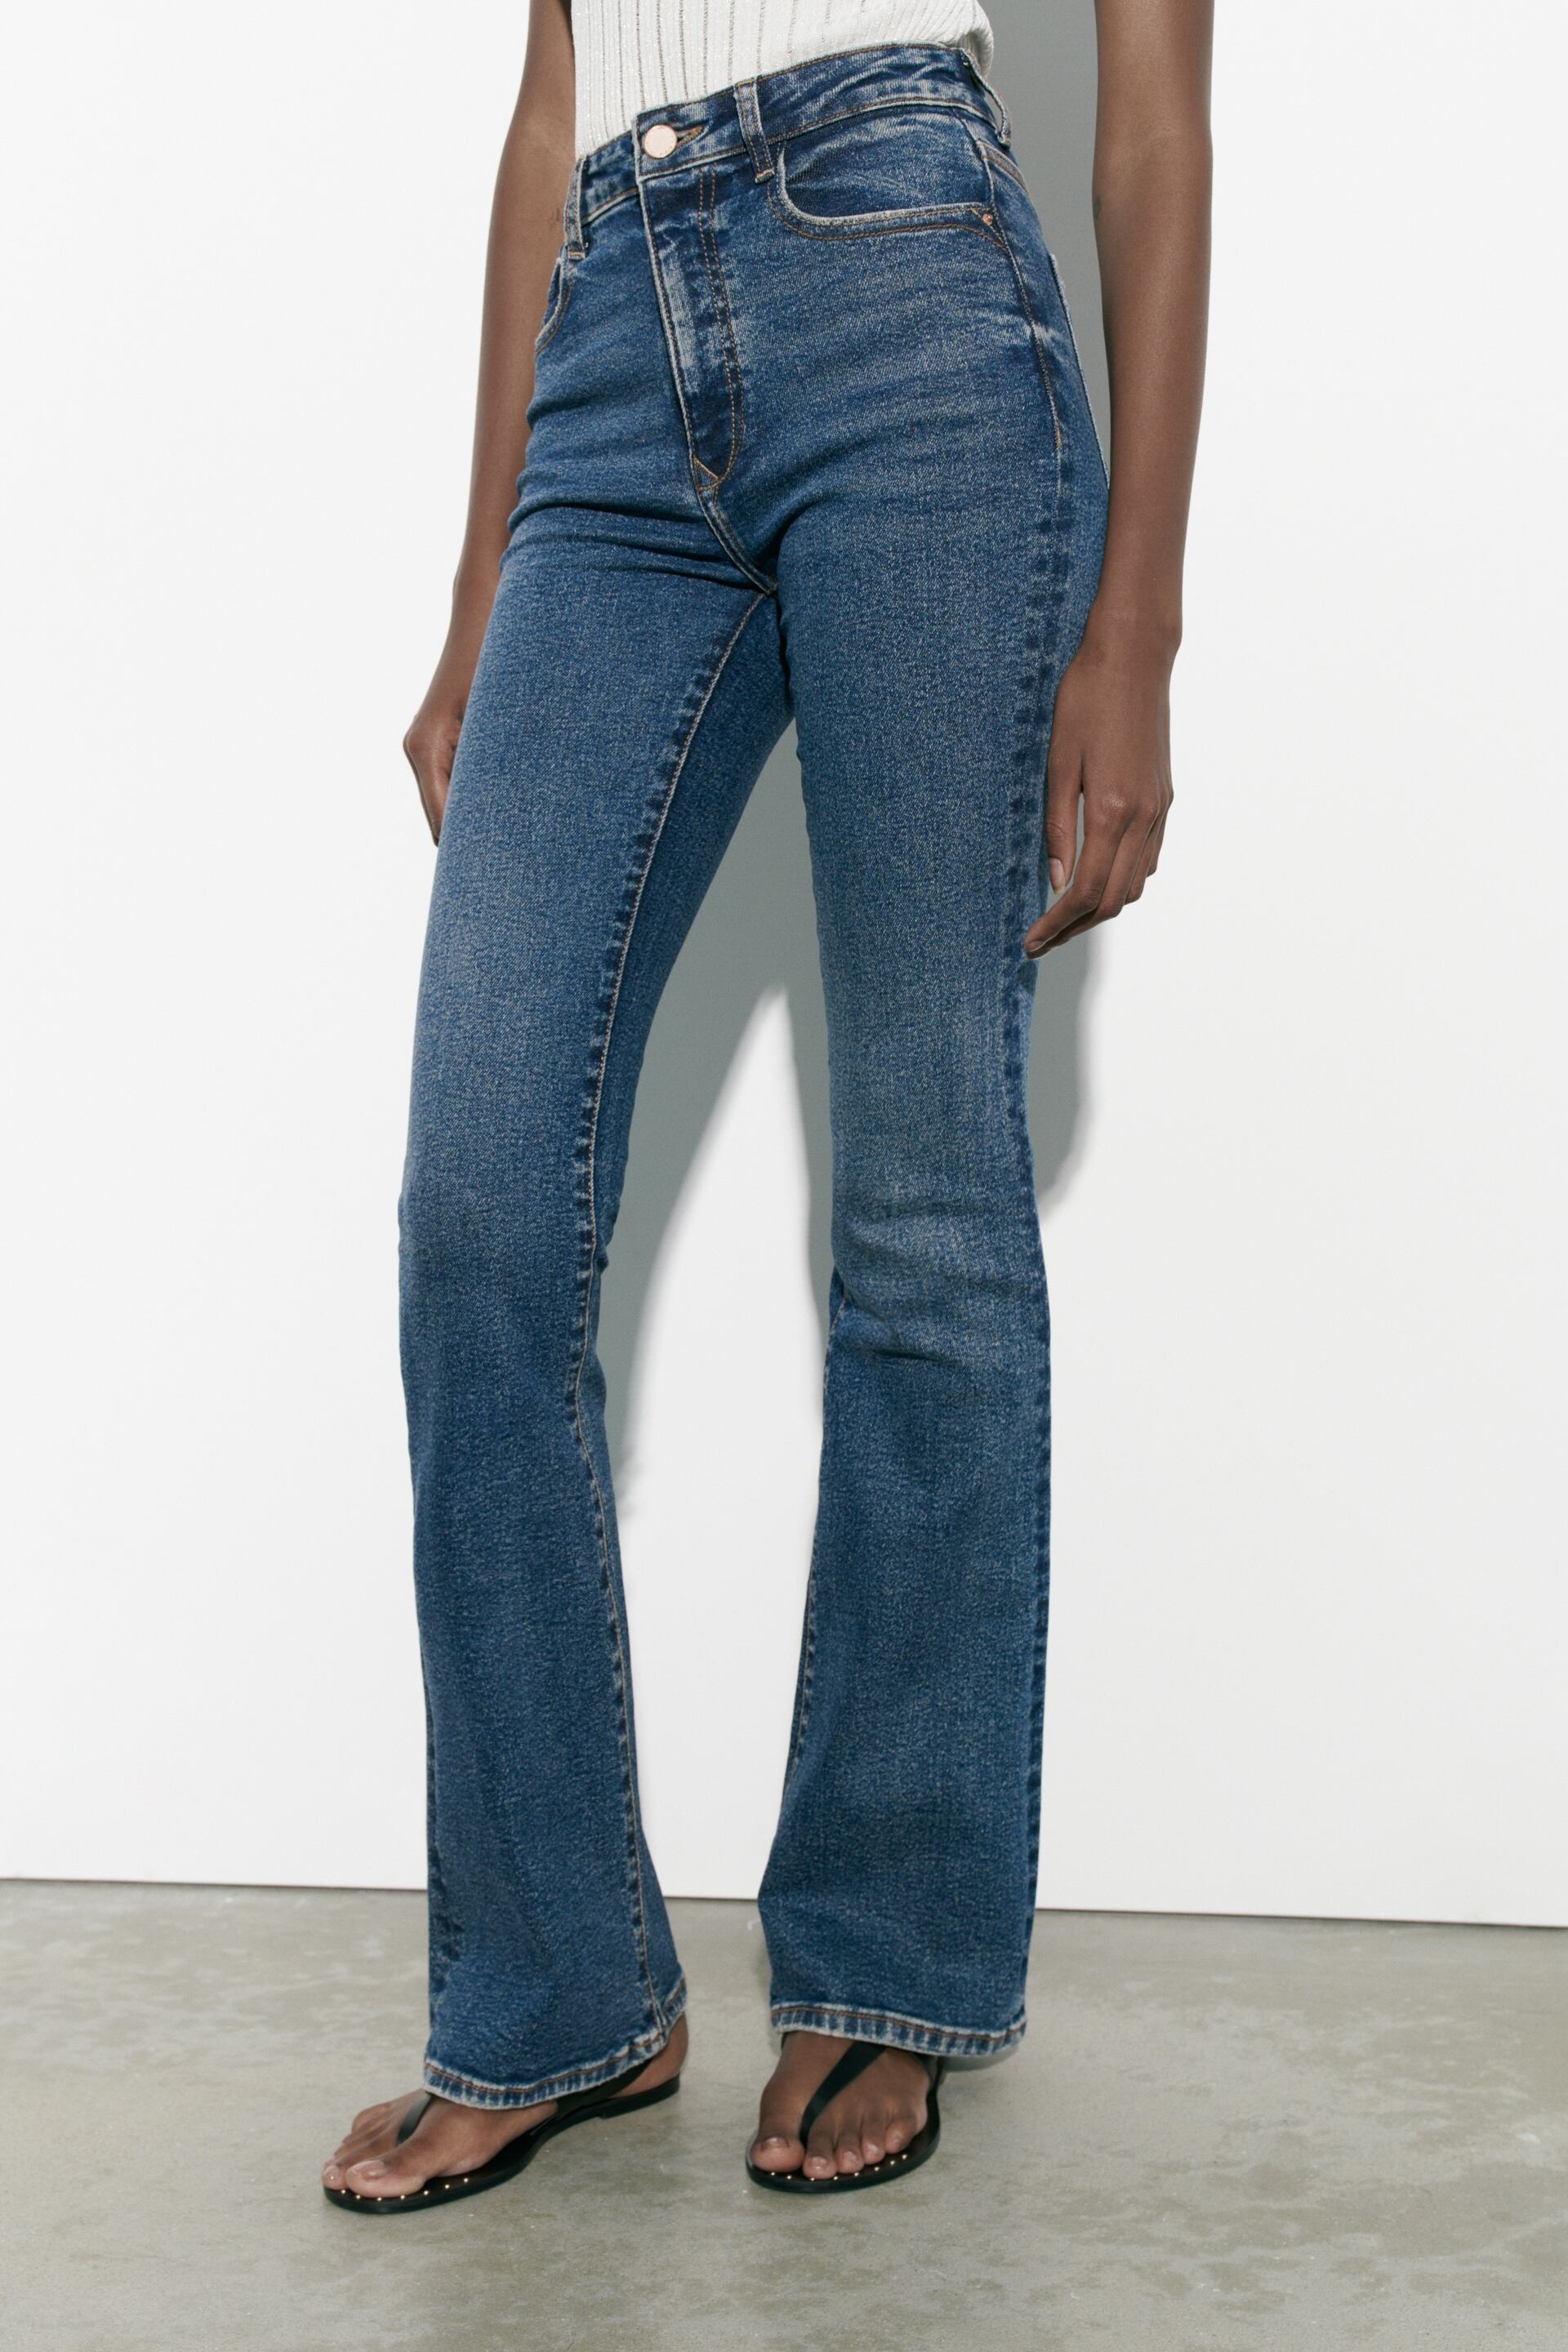 EXTRA LONG Z1975 HIGH RISE FLARE JEANS